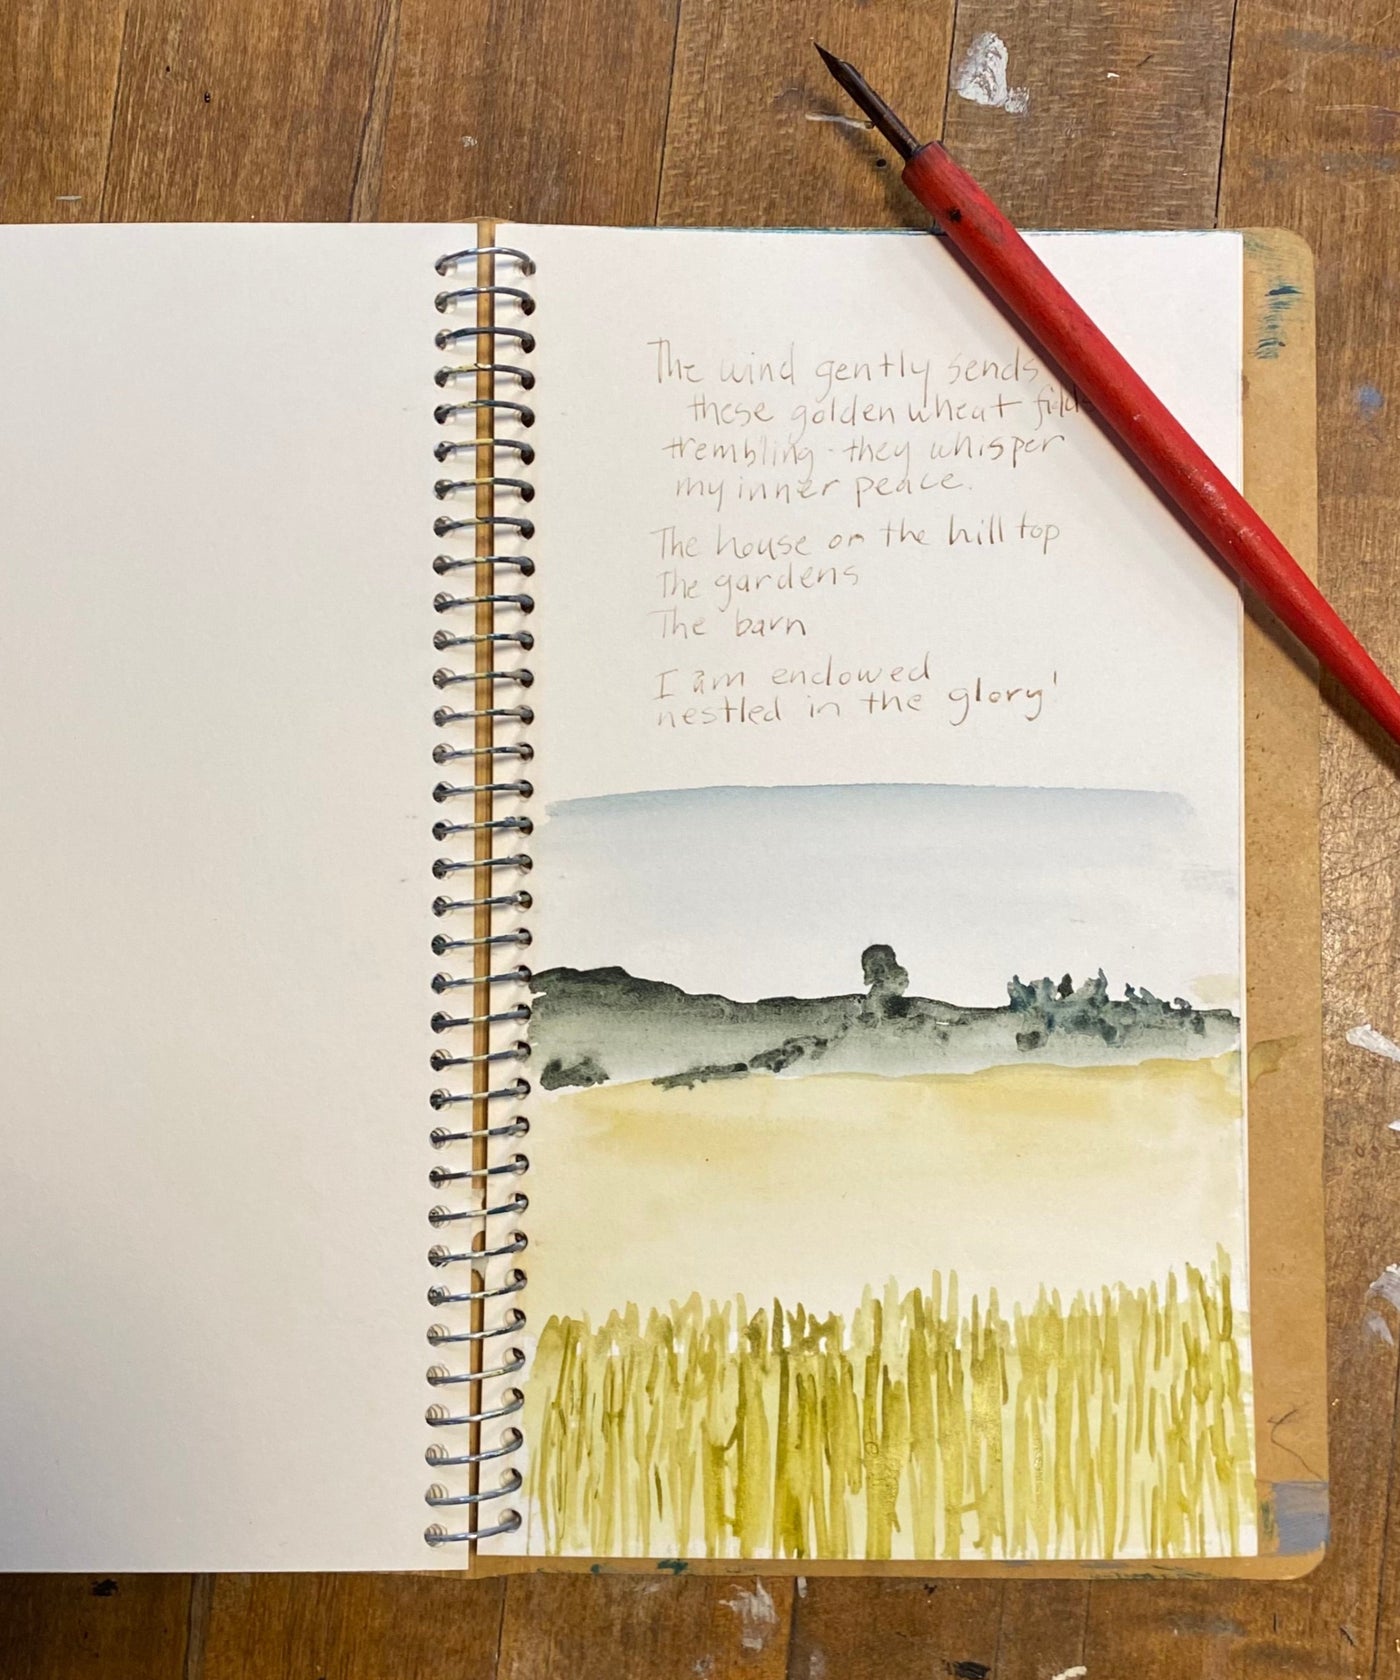 Poetry and place in an artist's sketchbook